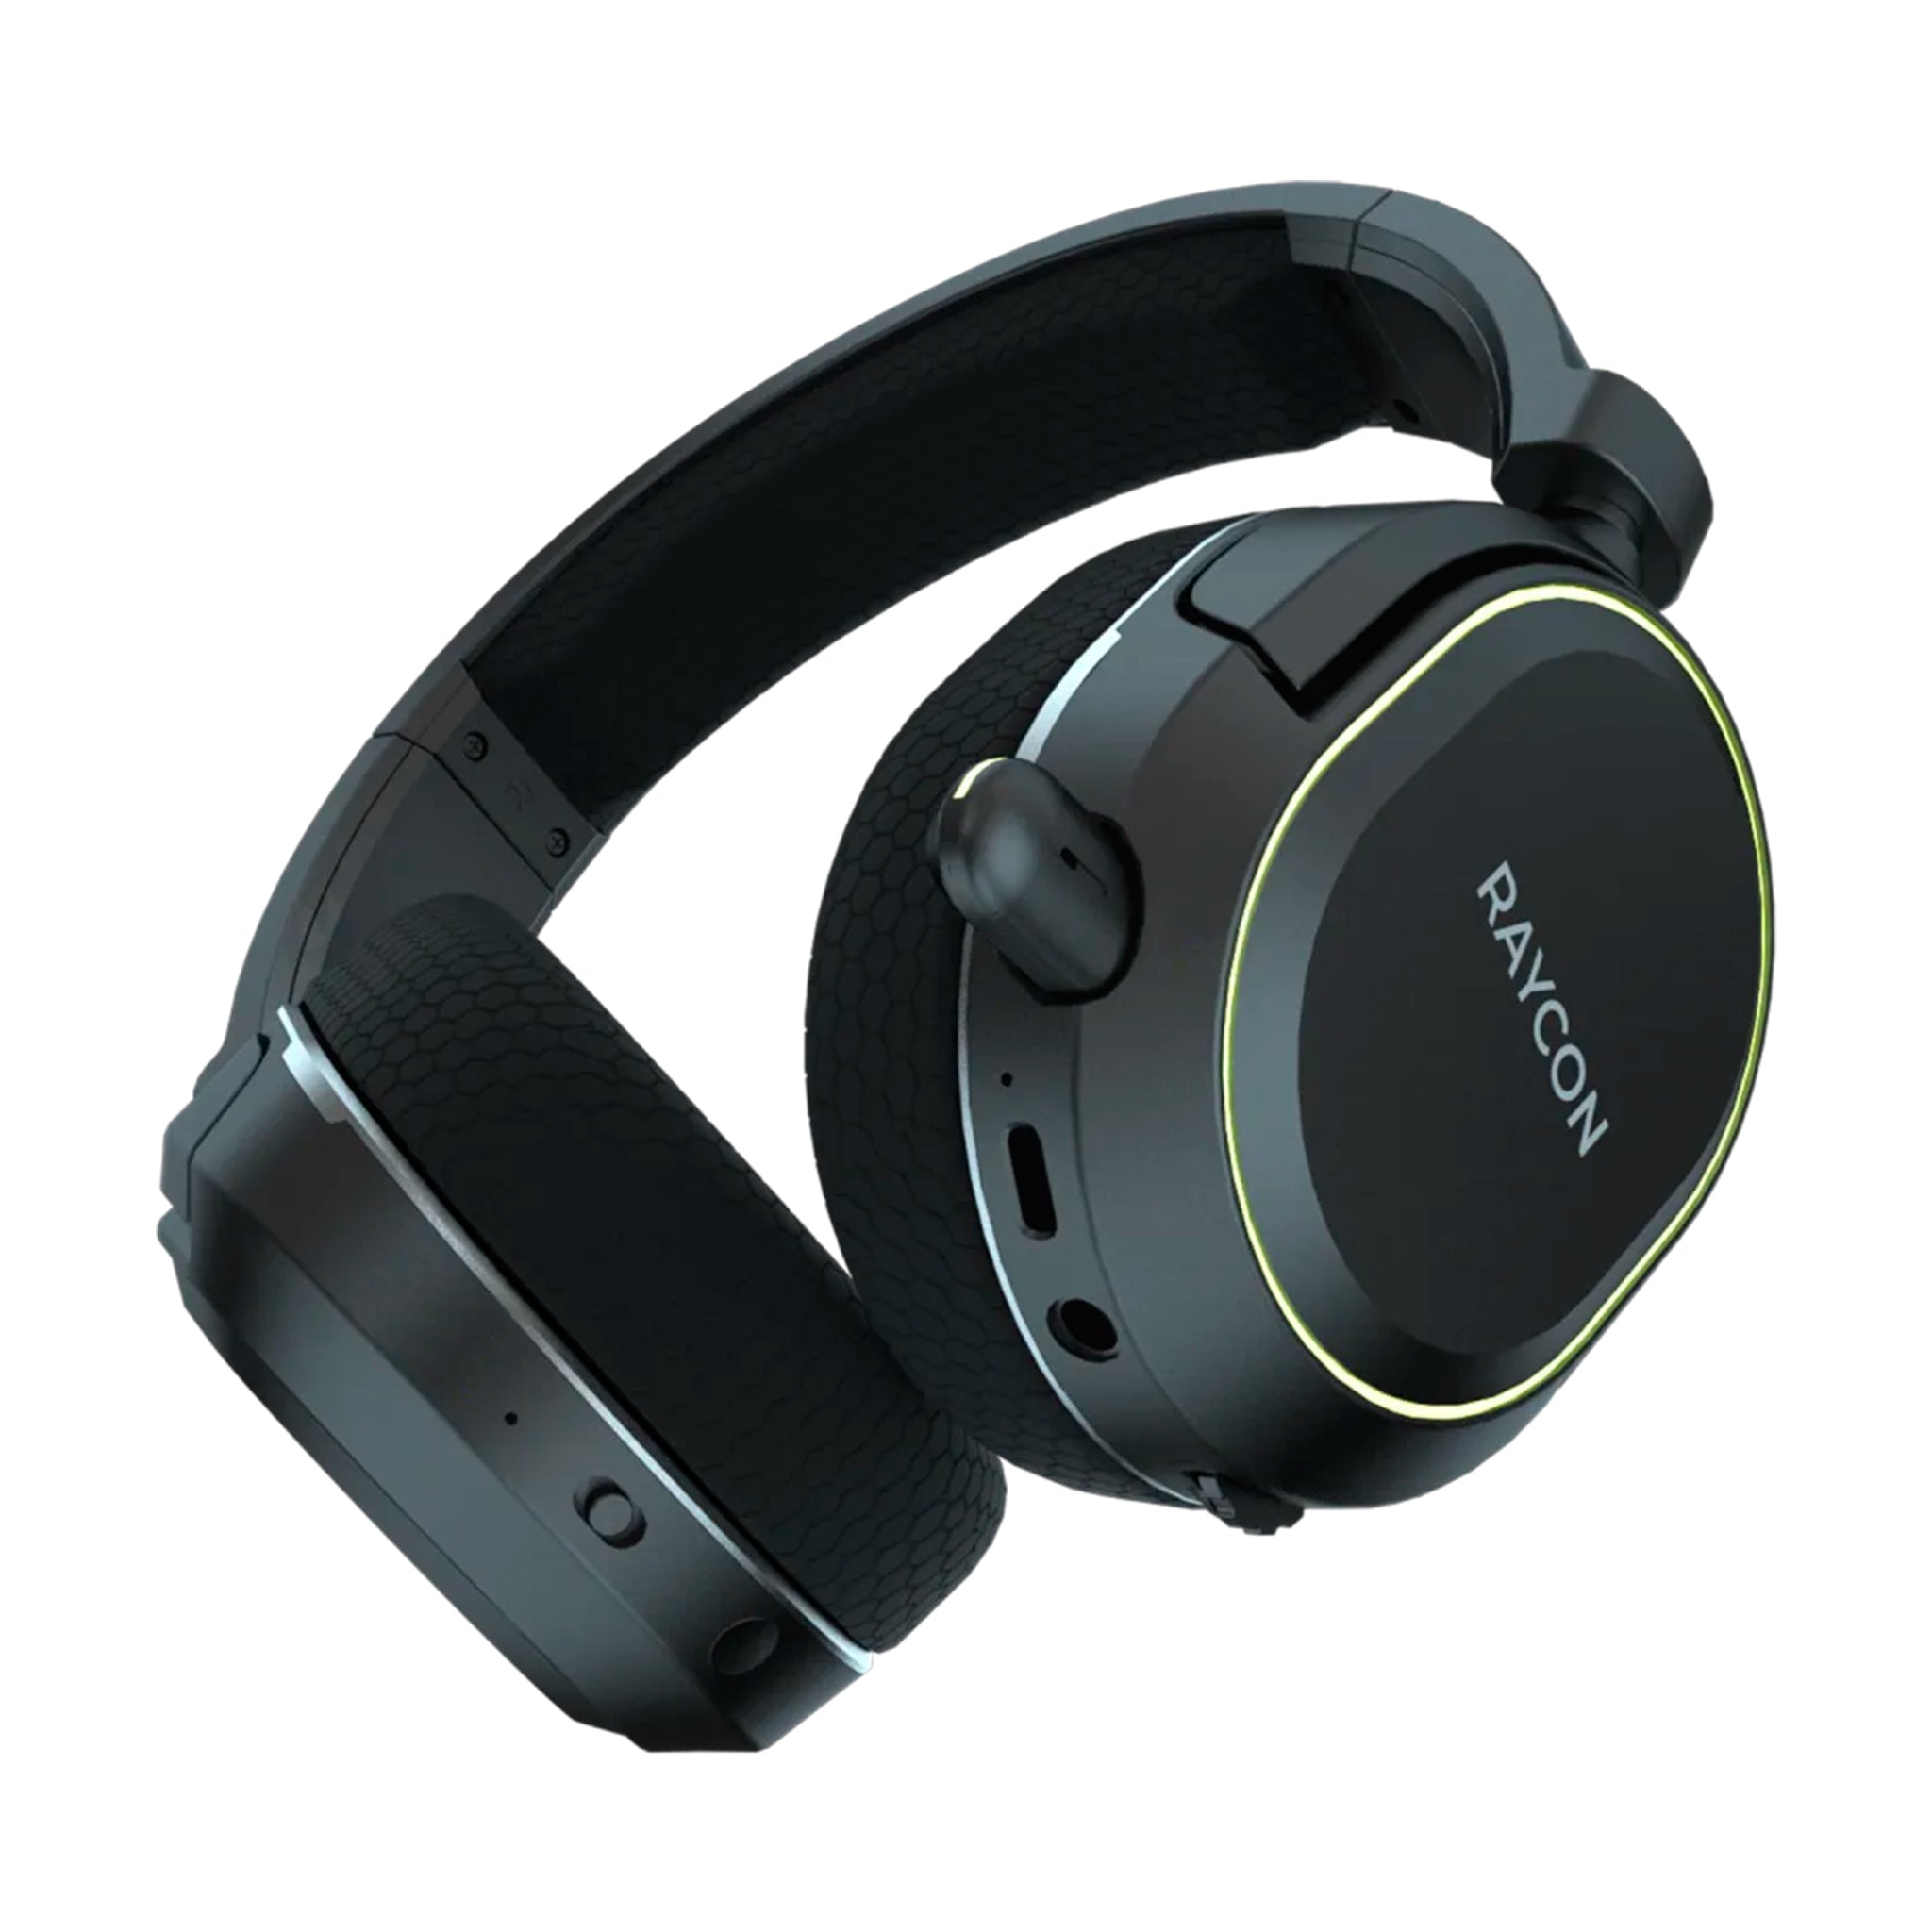 Raycon - The Gaming Over Ear Wireless Headphones - Black